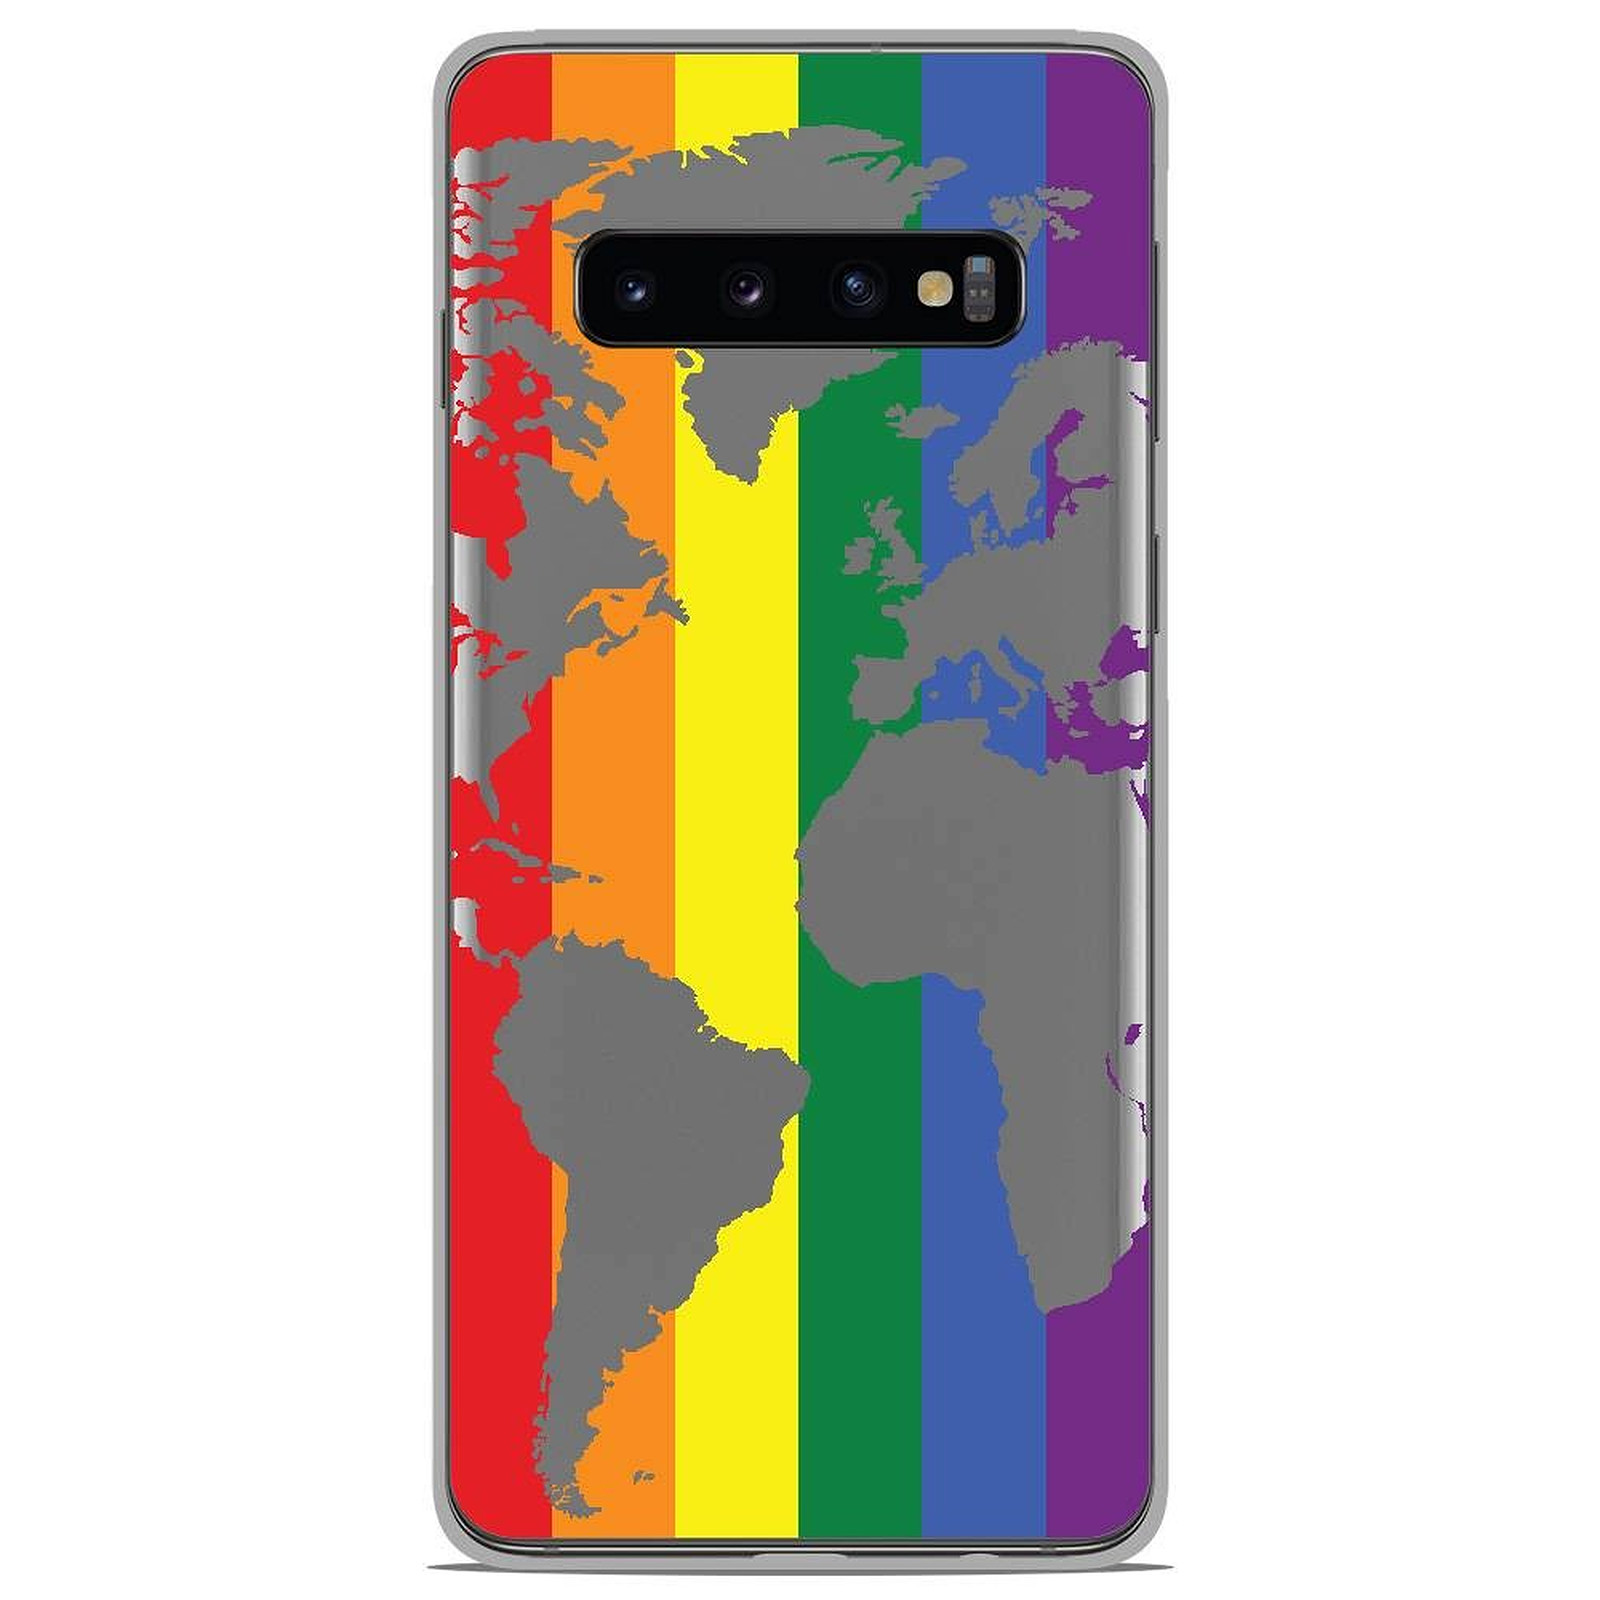 1001 Coques Coque silicone gel Huawei P30 motif Map beige - Coque telephone 1001Coques